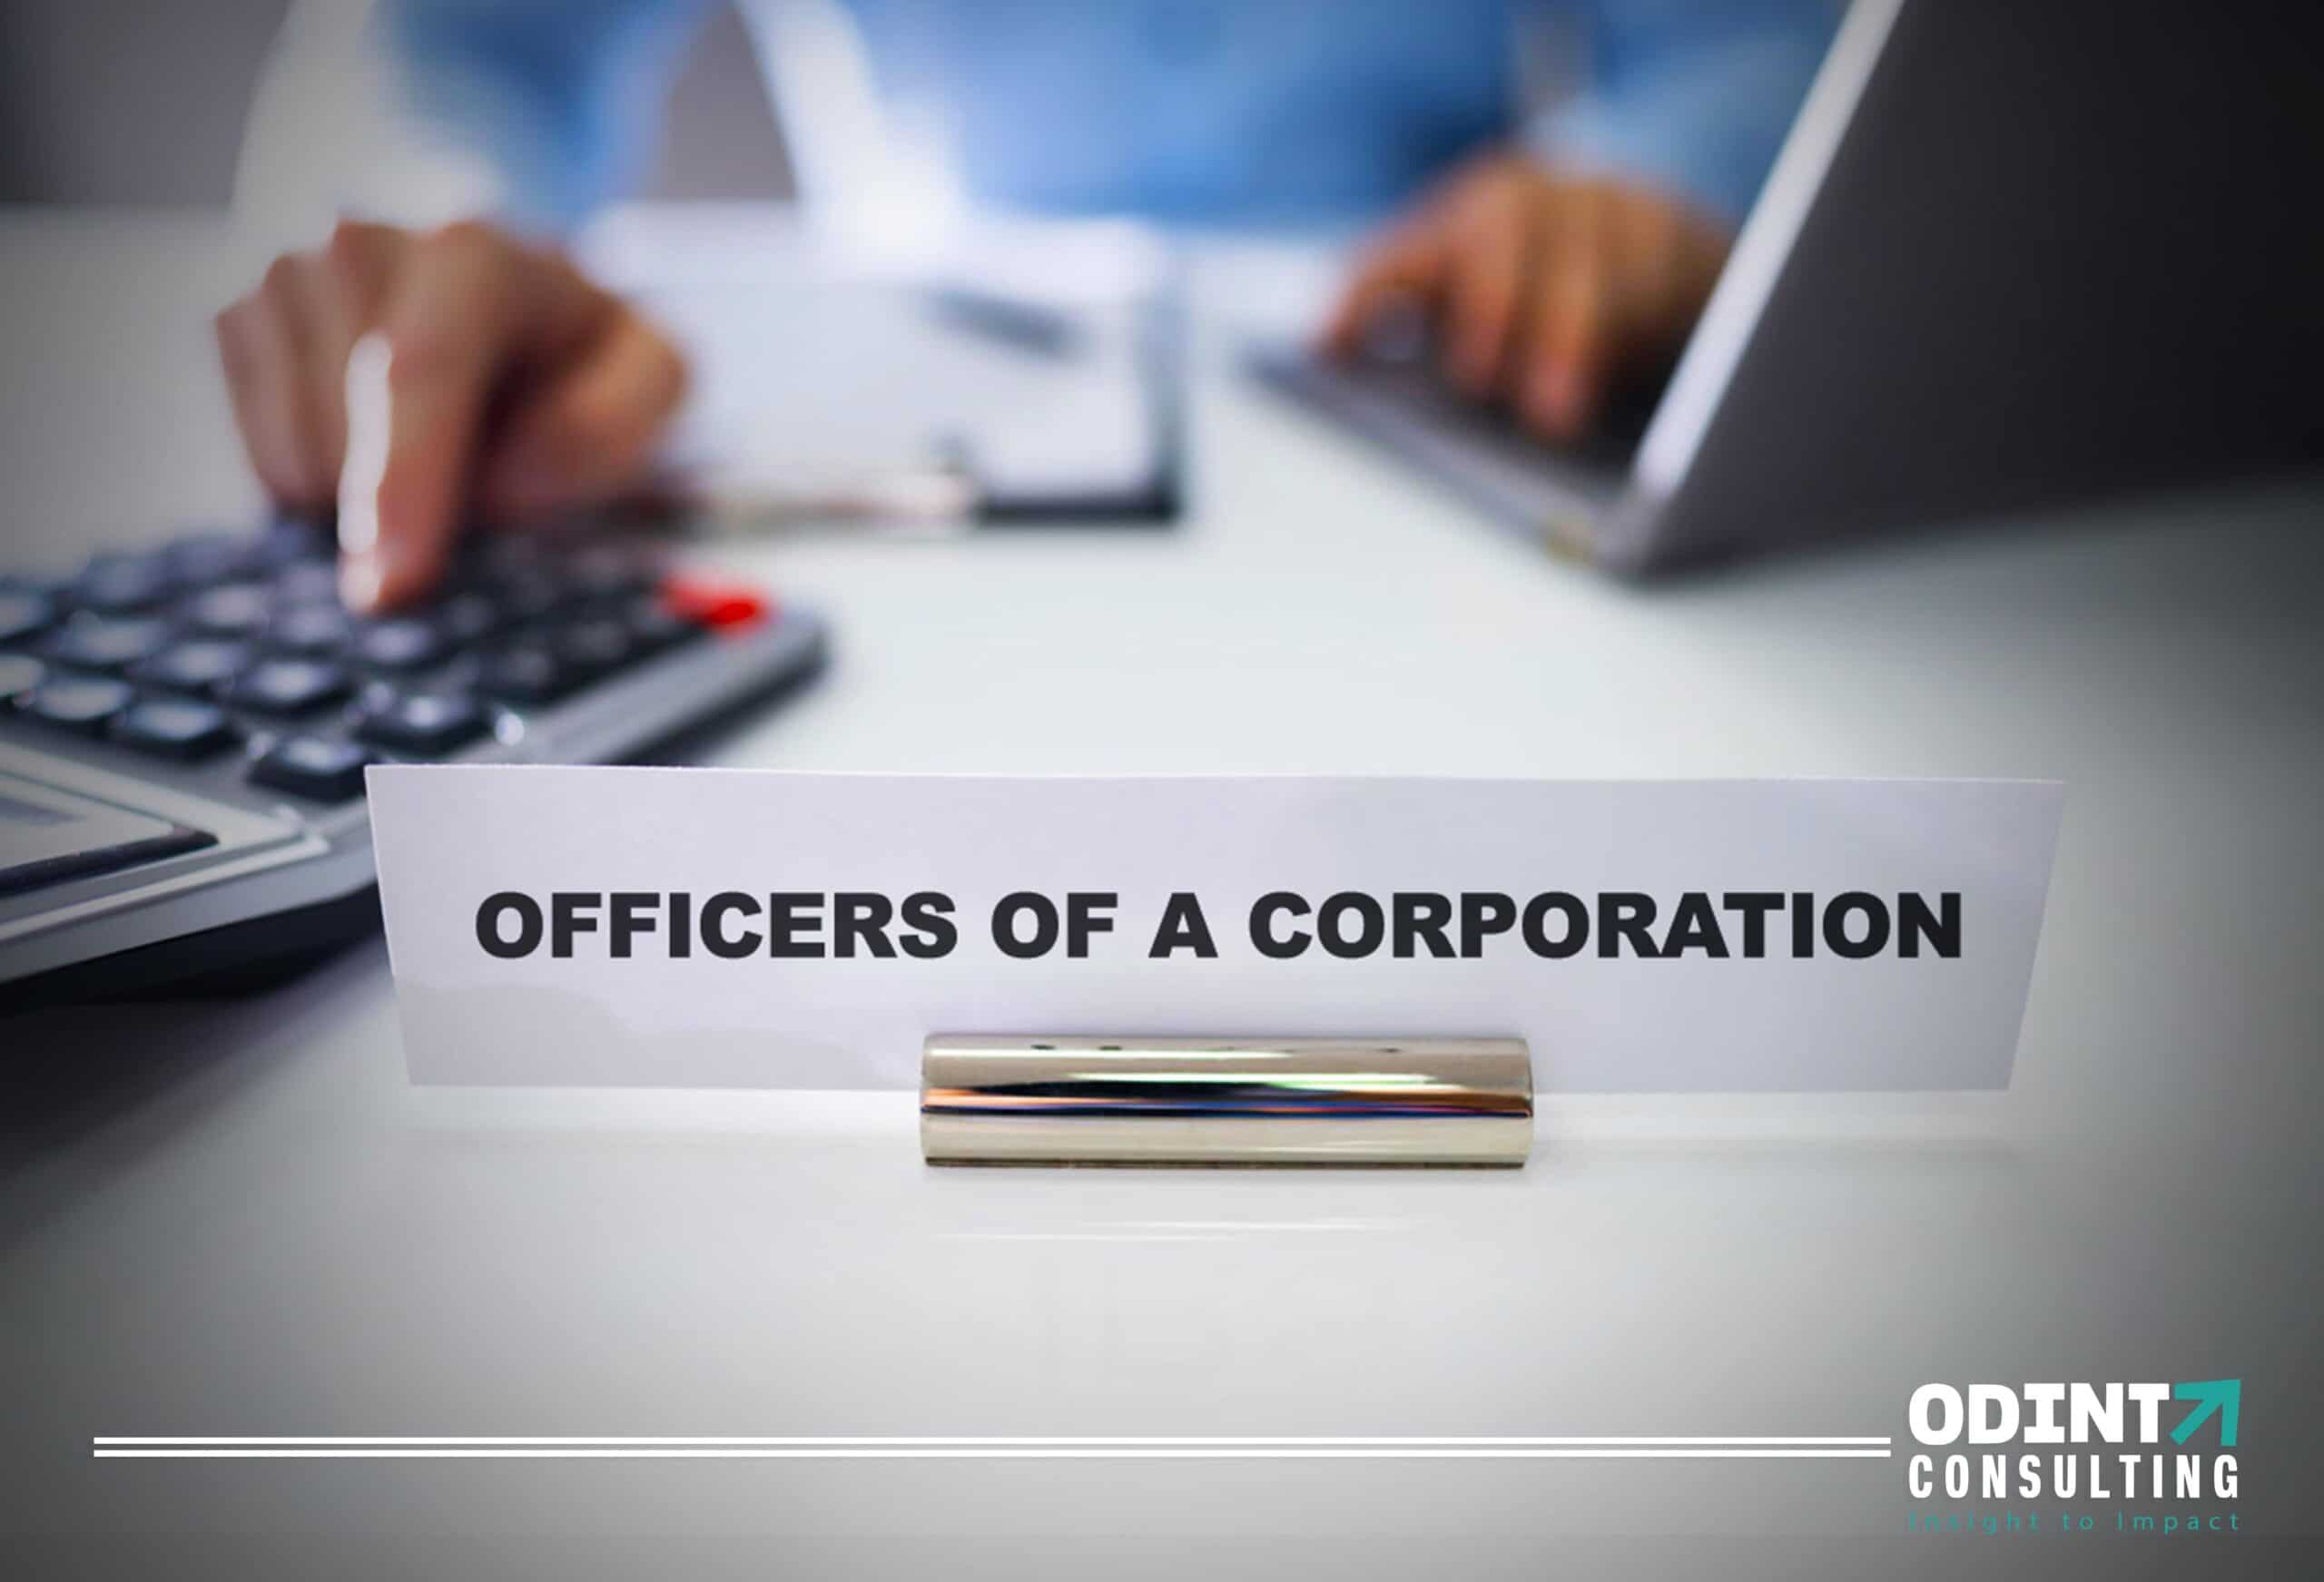 Officers Of A Corporation – Roles & Designations Explained